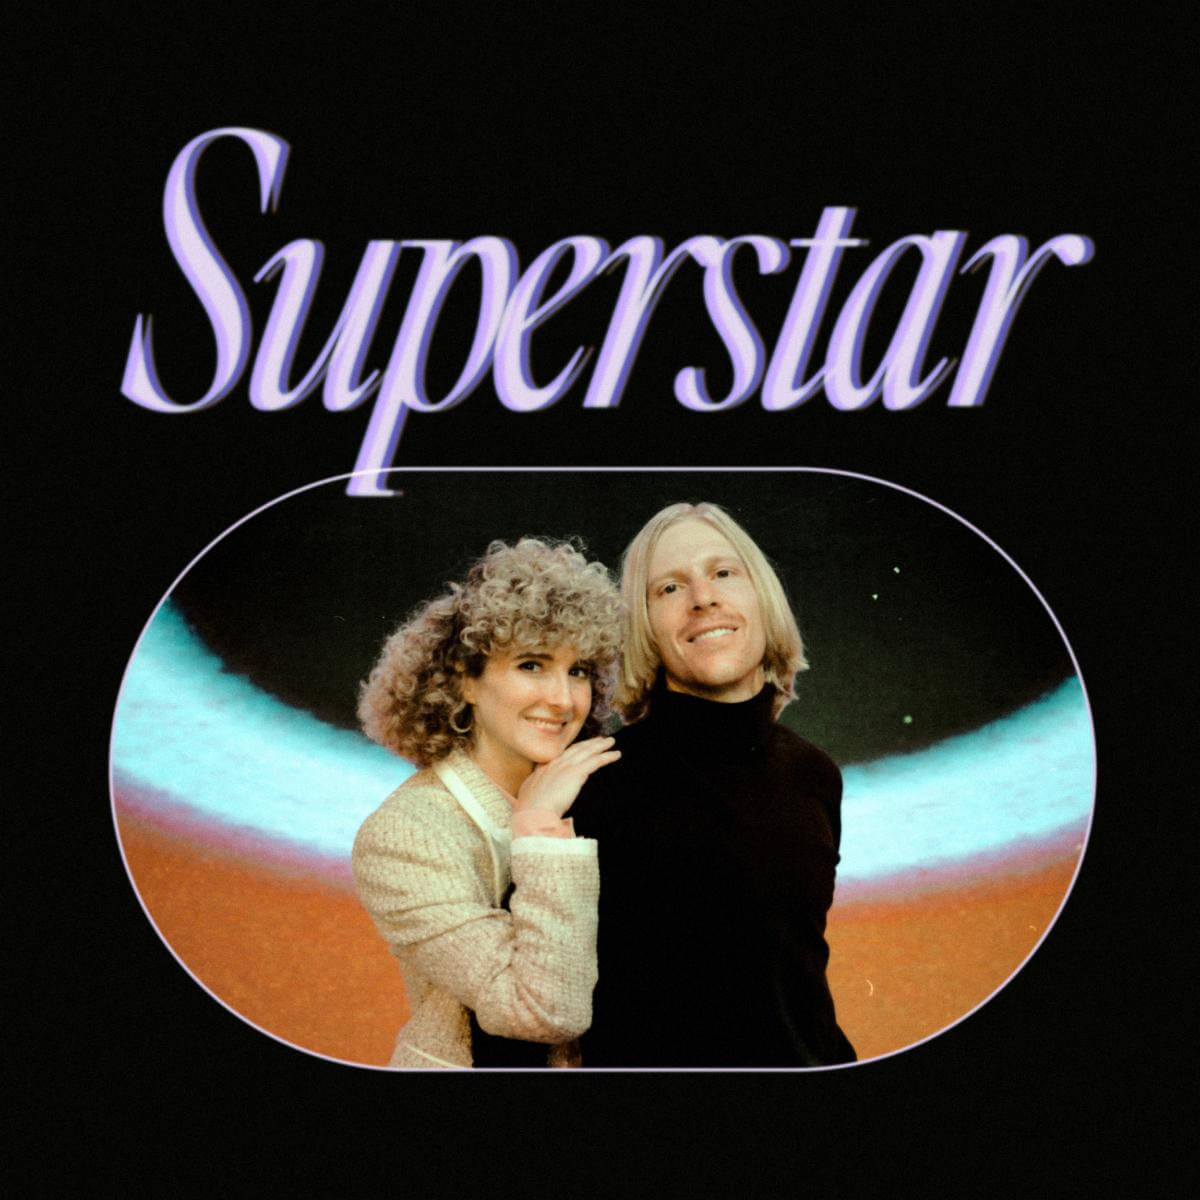 Tennis has unveiled their spectacular new version of the Carpenters’ classic “Superstar.” Produced and recorded by the husband and wife duo